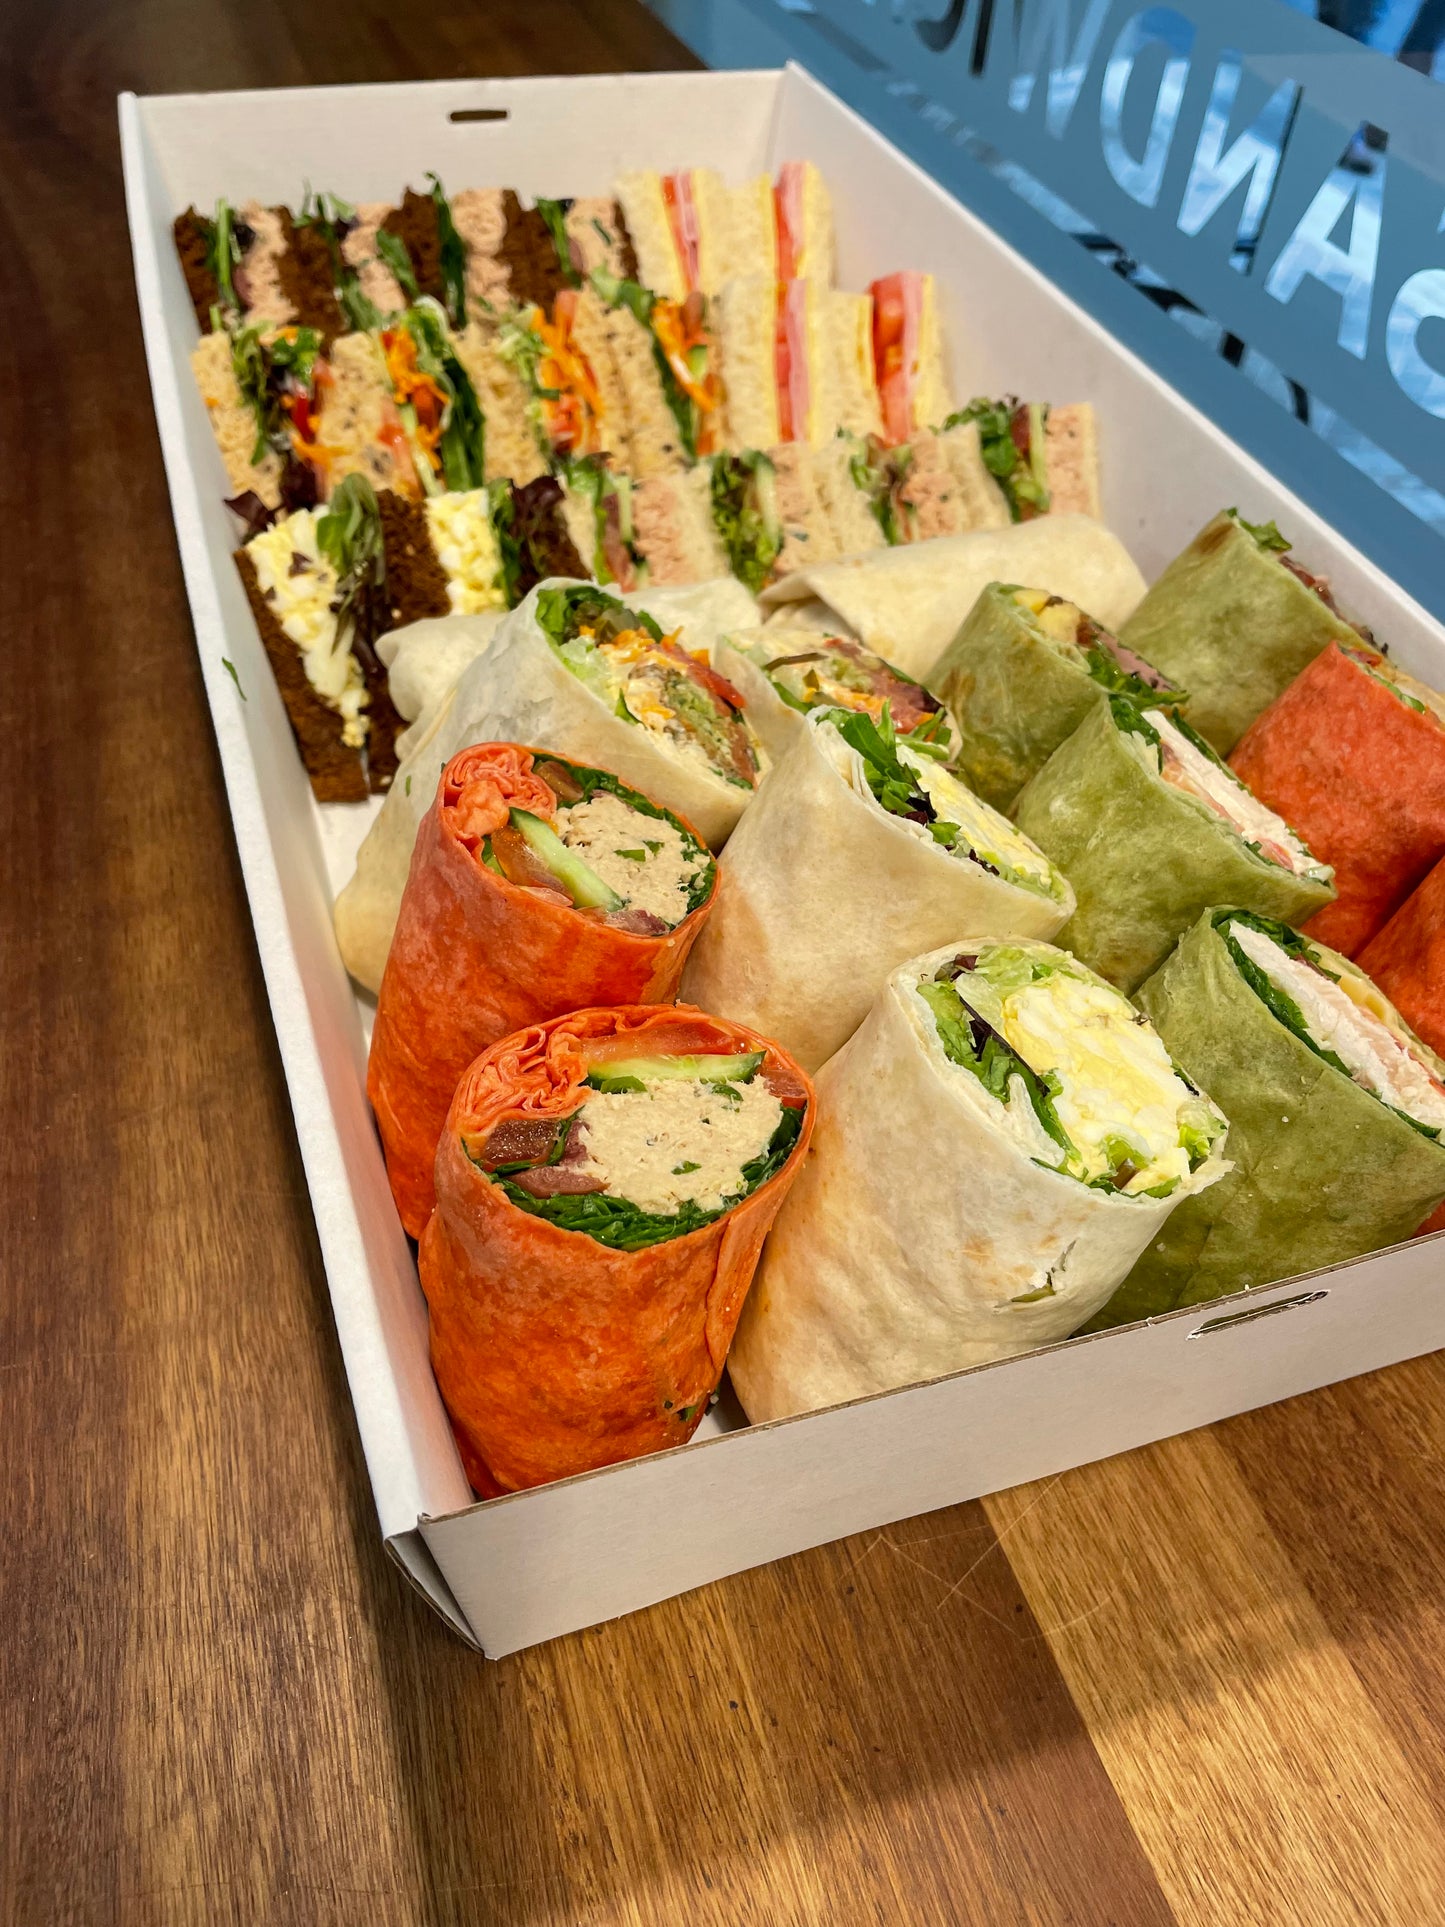 Sandwiches & Wraps Corporate Catering